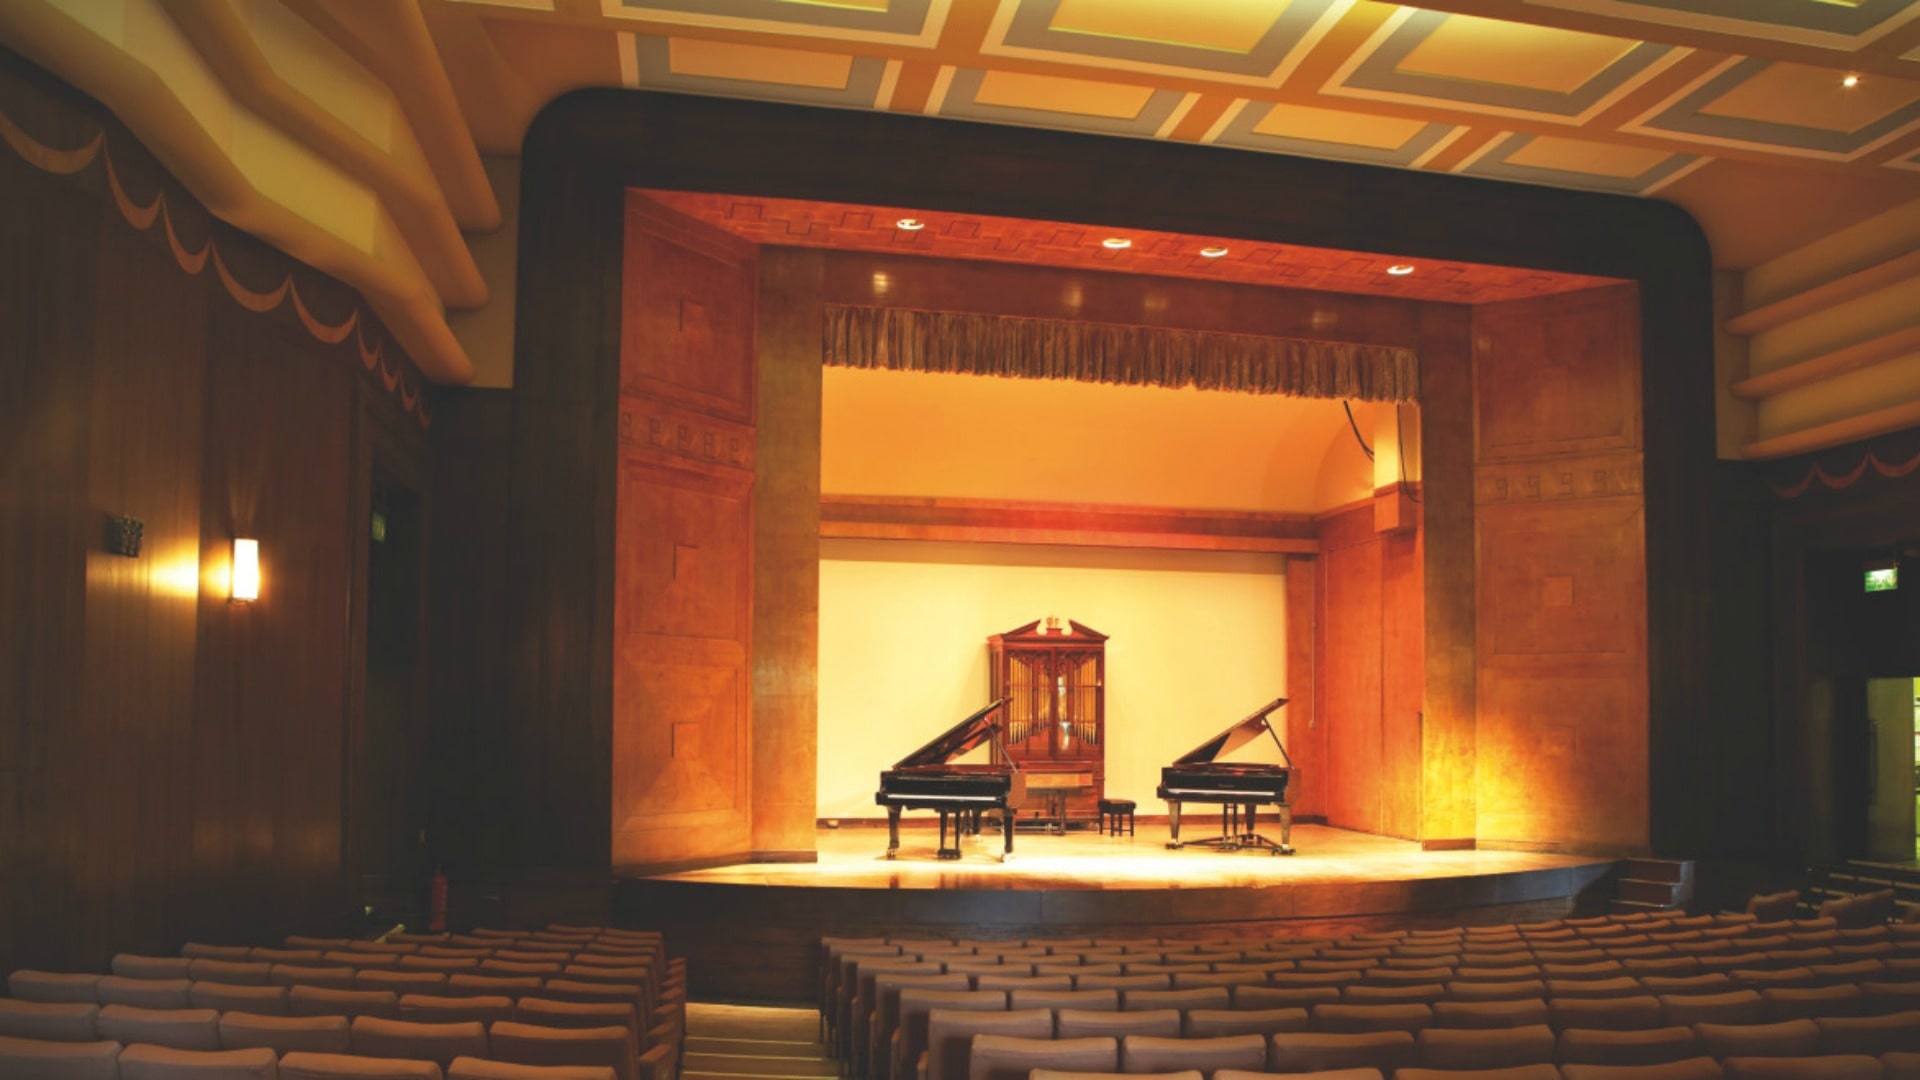 The Barber concert hall with two grand pianos on stage.